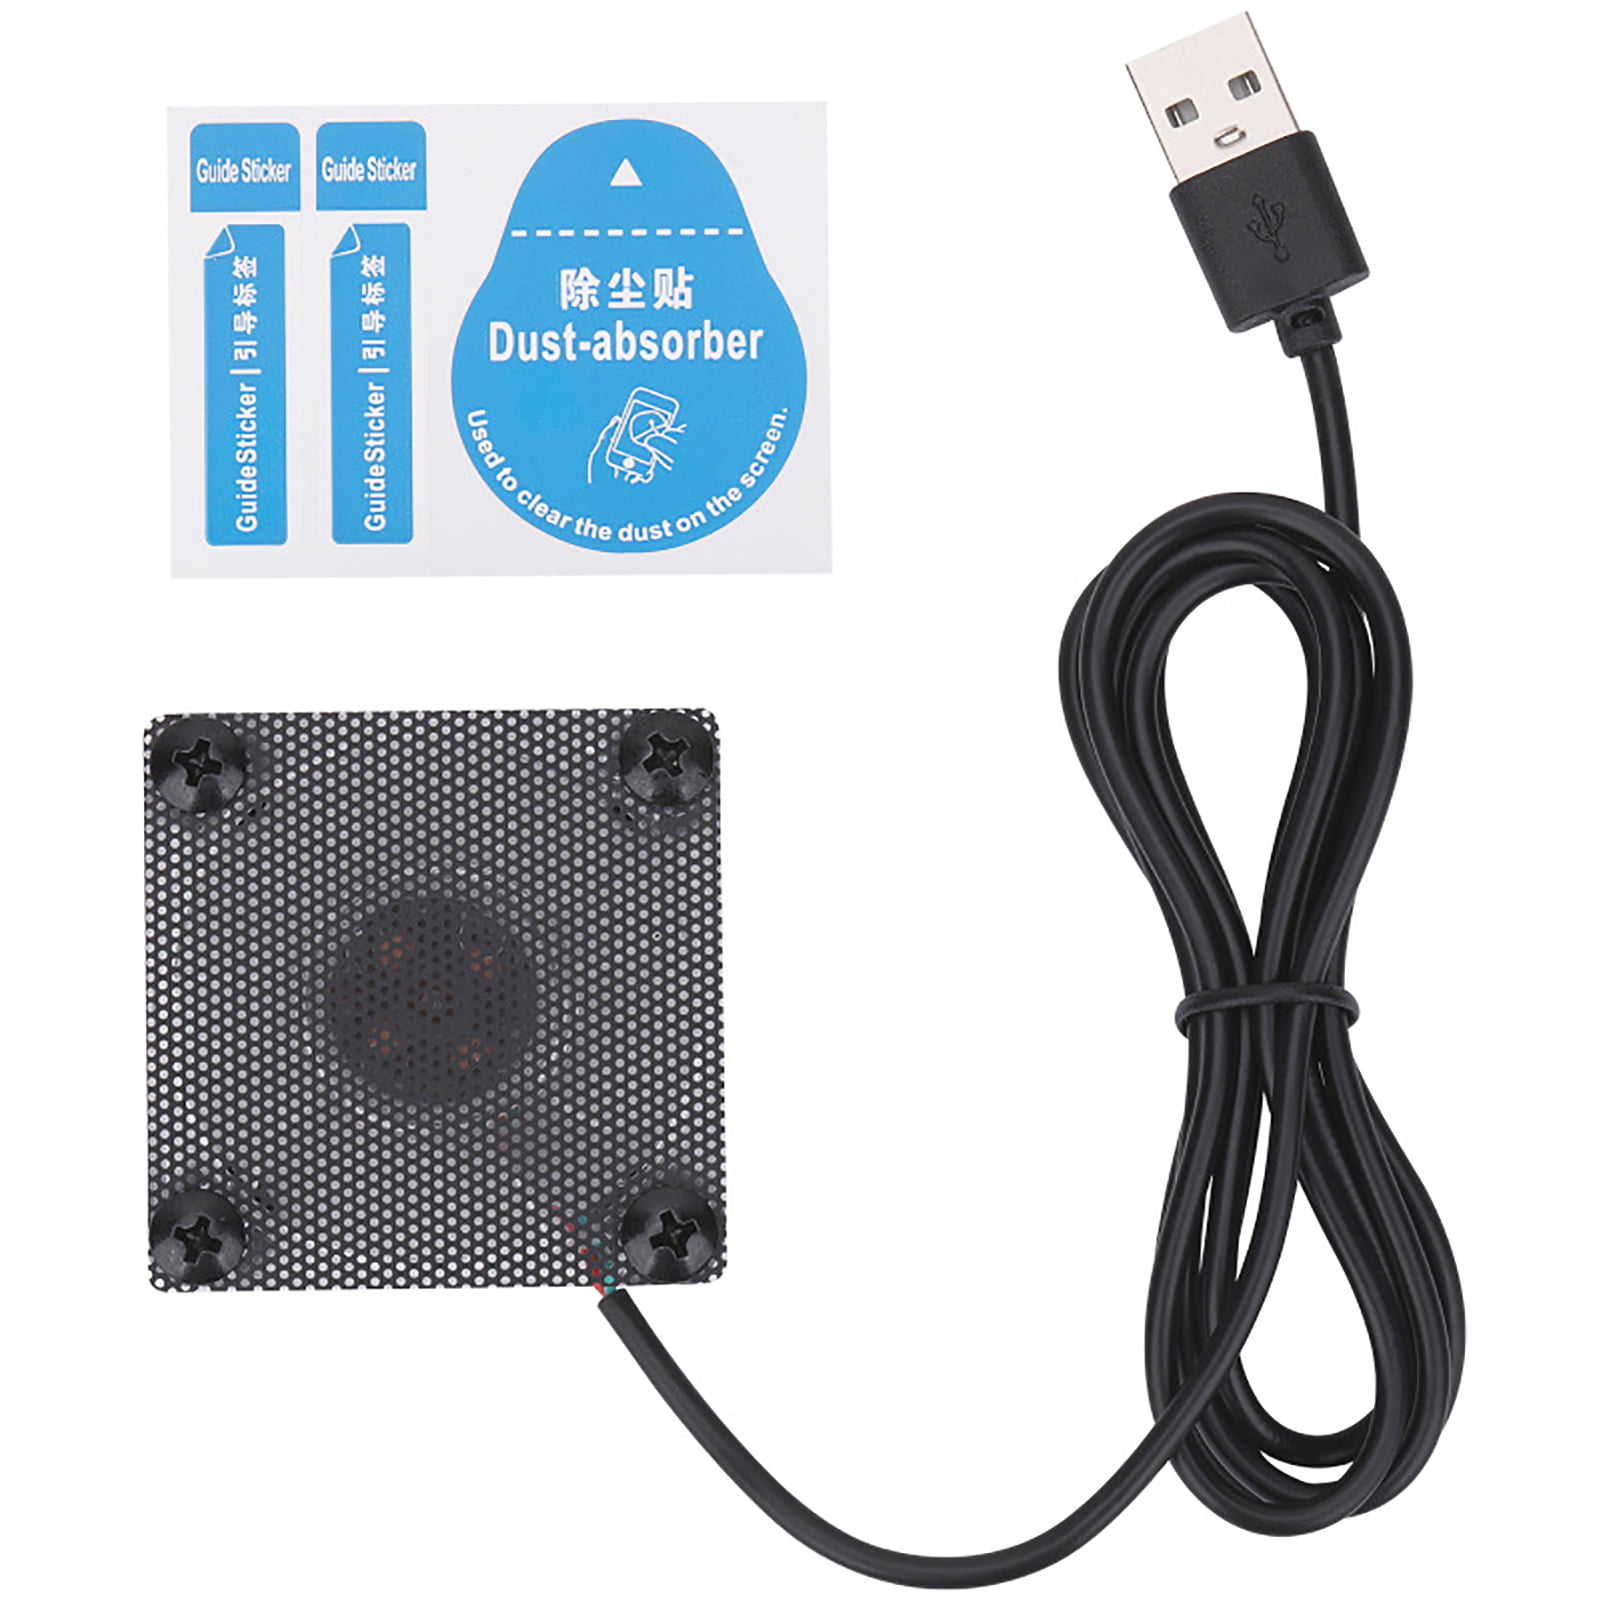 Cooler Micro USB Mini Air Fan For Android Smartphone Samsung Galaxy Note 3 4 CA 